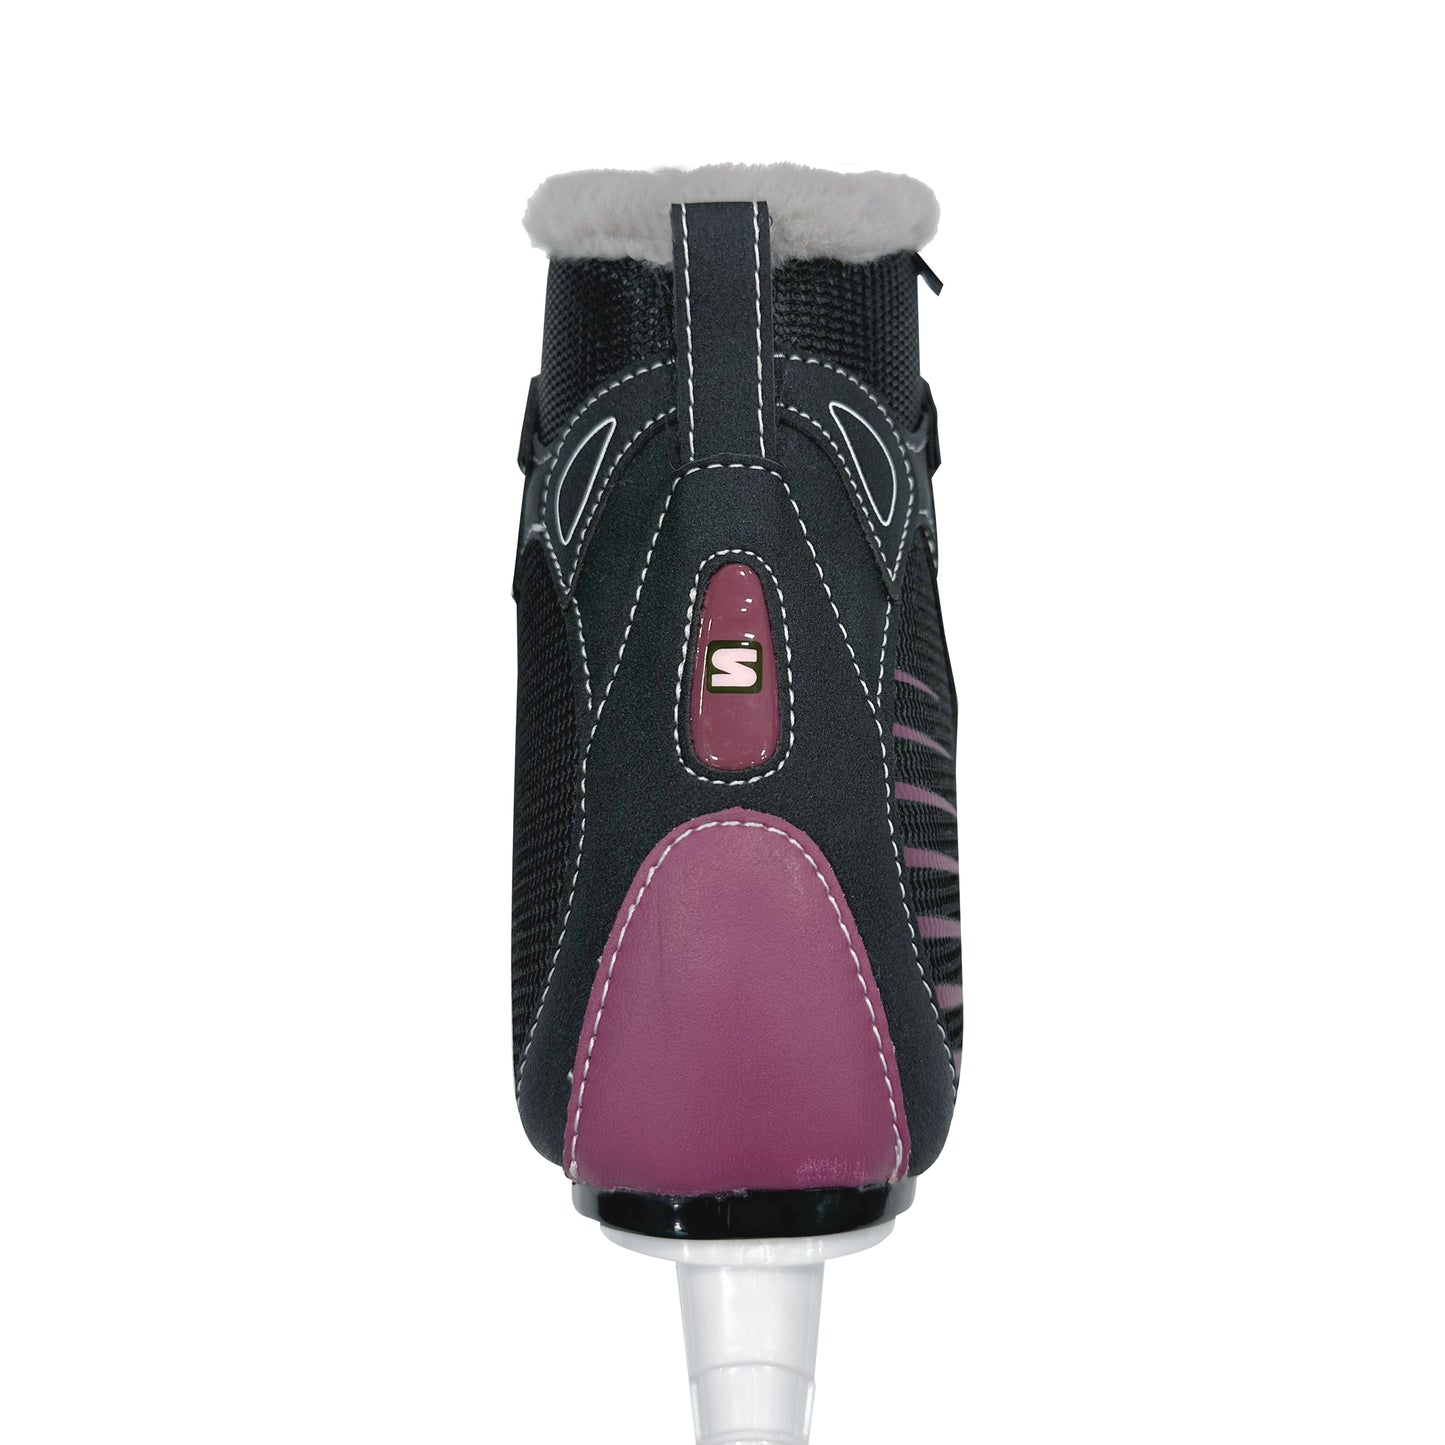 PATIN A GLACE SOFTMAX LS-957 FEMME